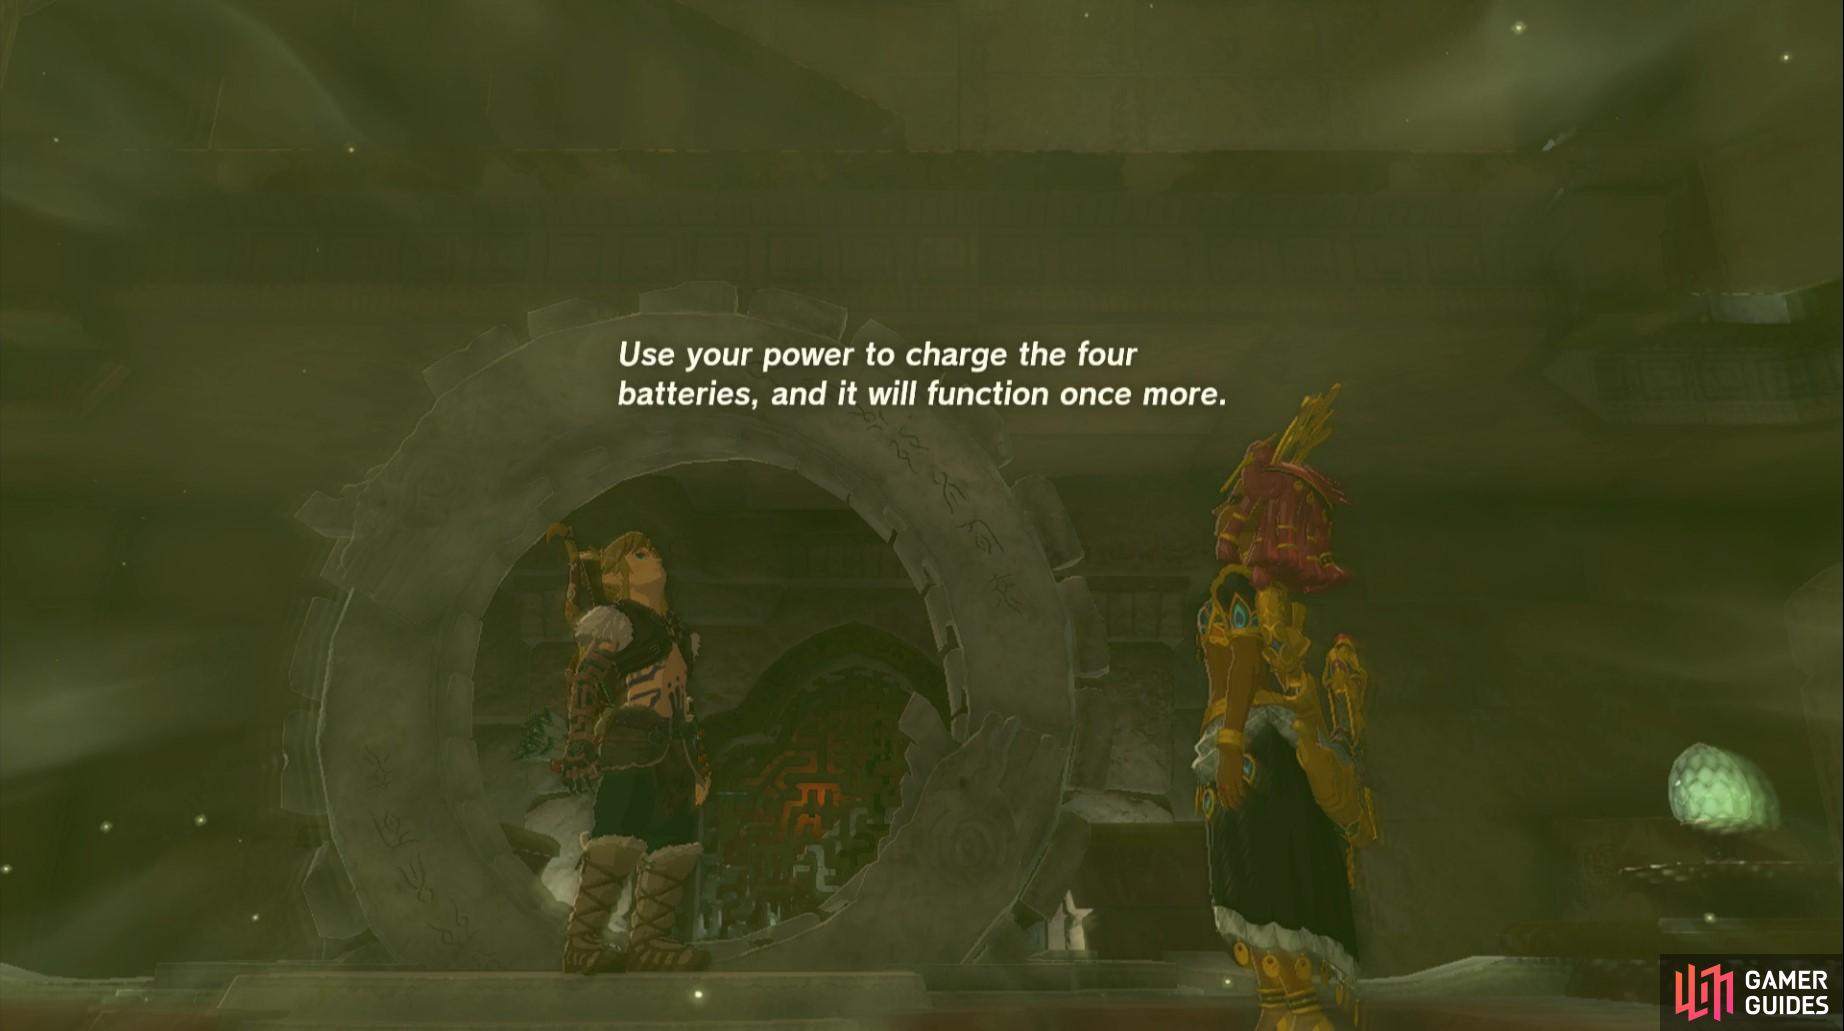 Once at the center of the Lightning Temple, you’ll be required to charge the four batteries to bring power to the elevator platform. 